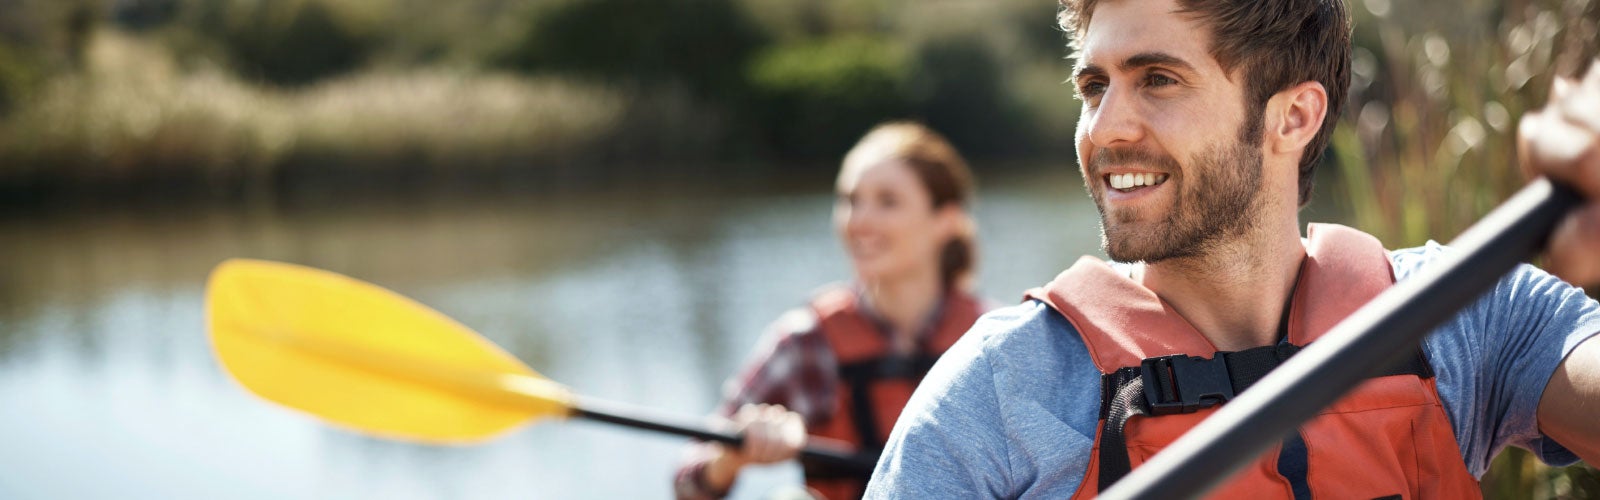 Young couple kayaking together on a lake. Find RLI Insurance.